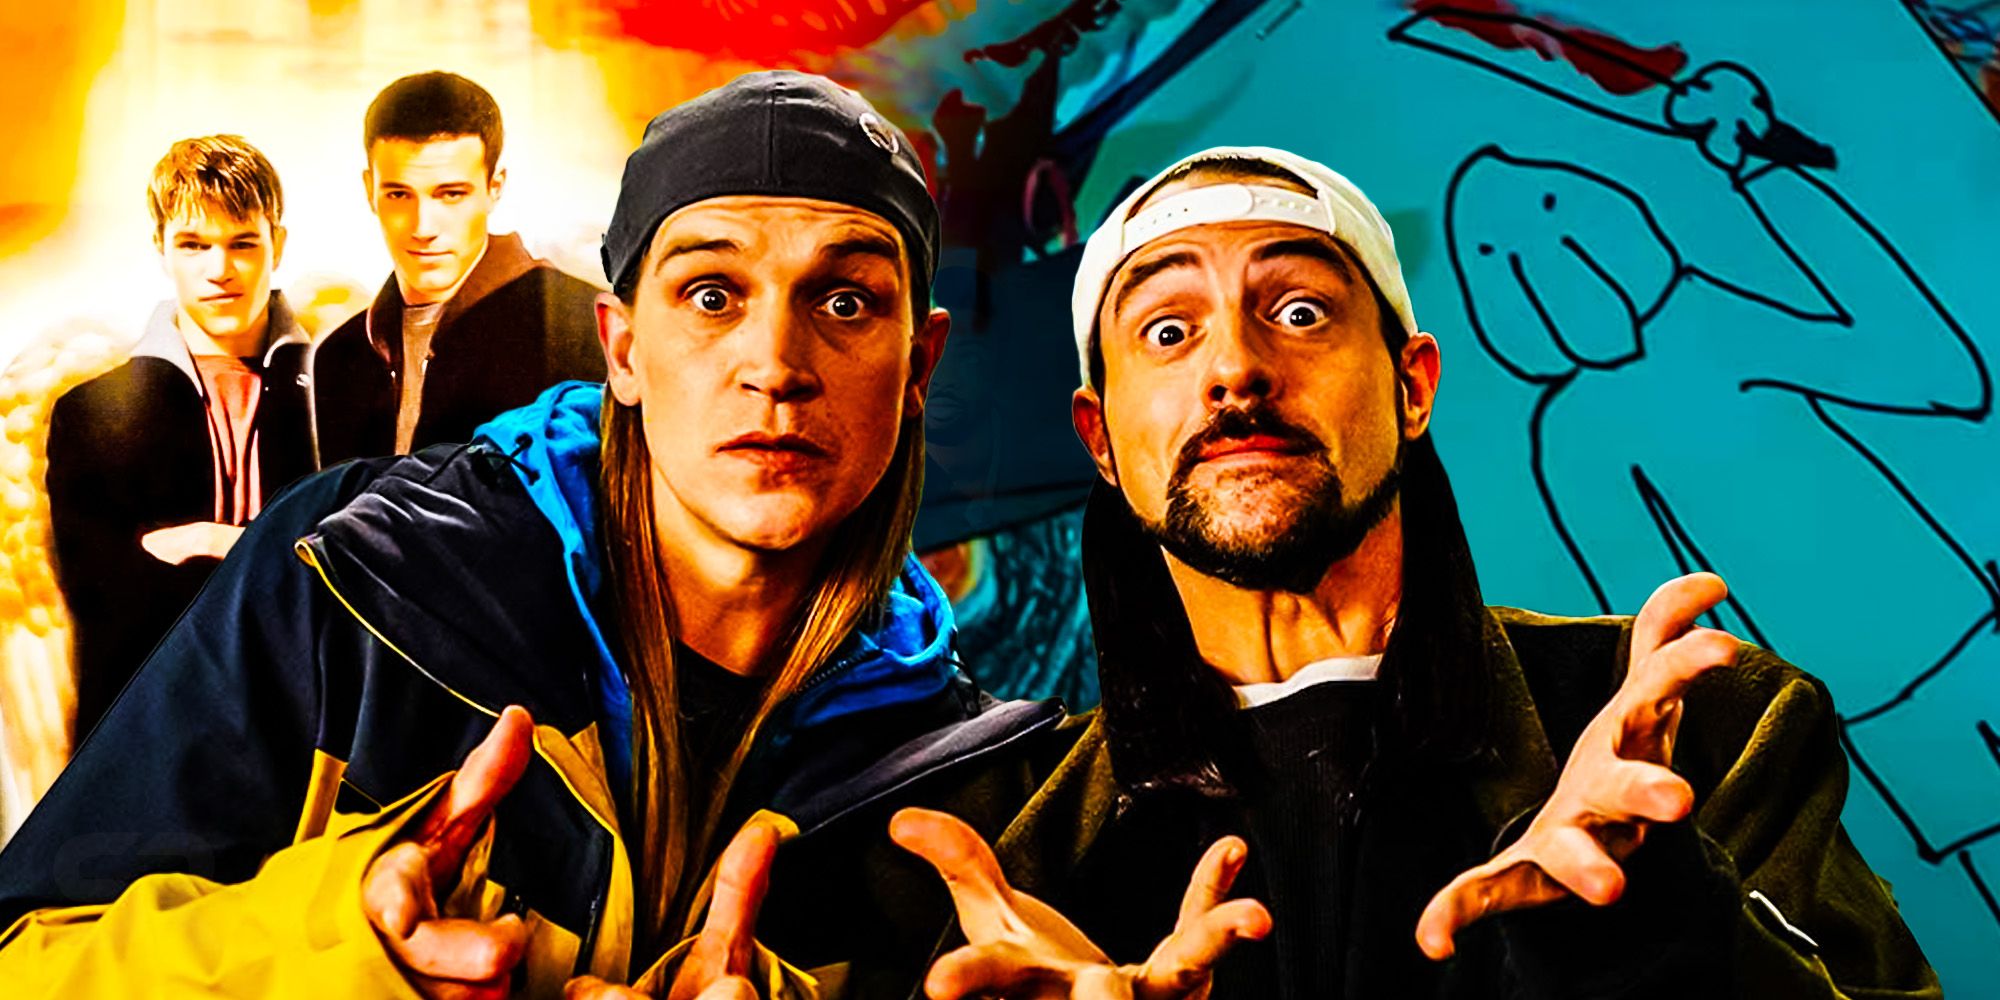 Kevin smith movies ranked dogma jay and silent bob kilroy was here